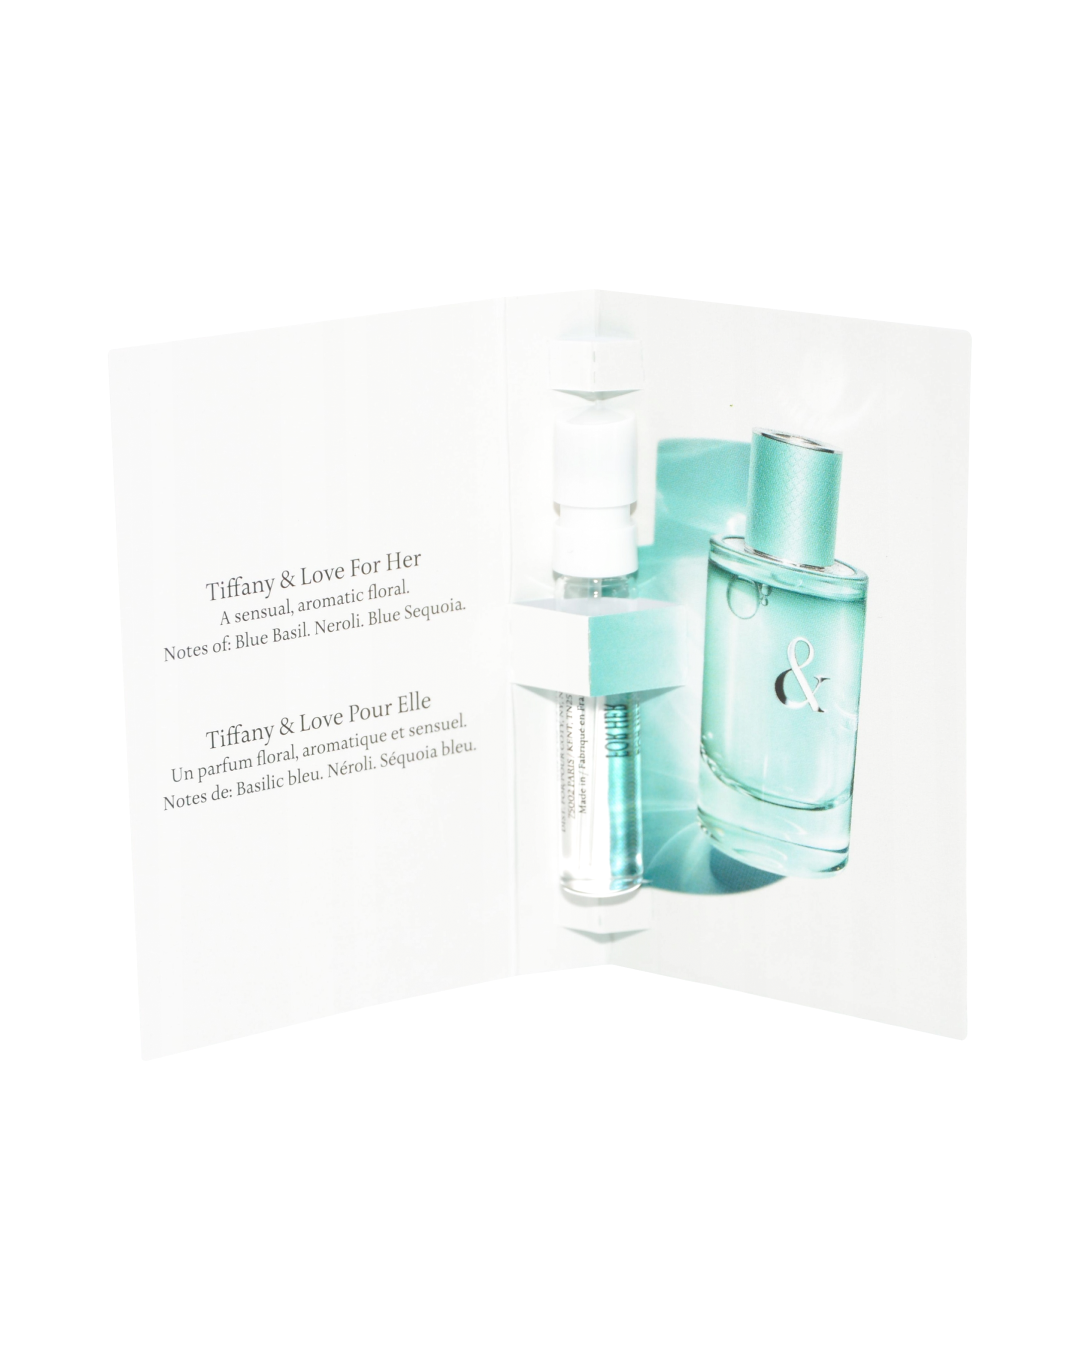 Tiffany & Co. Tiffany & Love EDP for Her Travel Vial (1.2ml) - Best Buy World Philippines